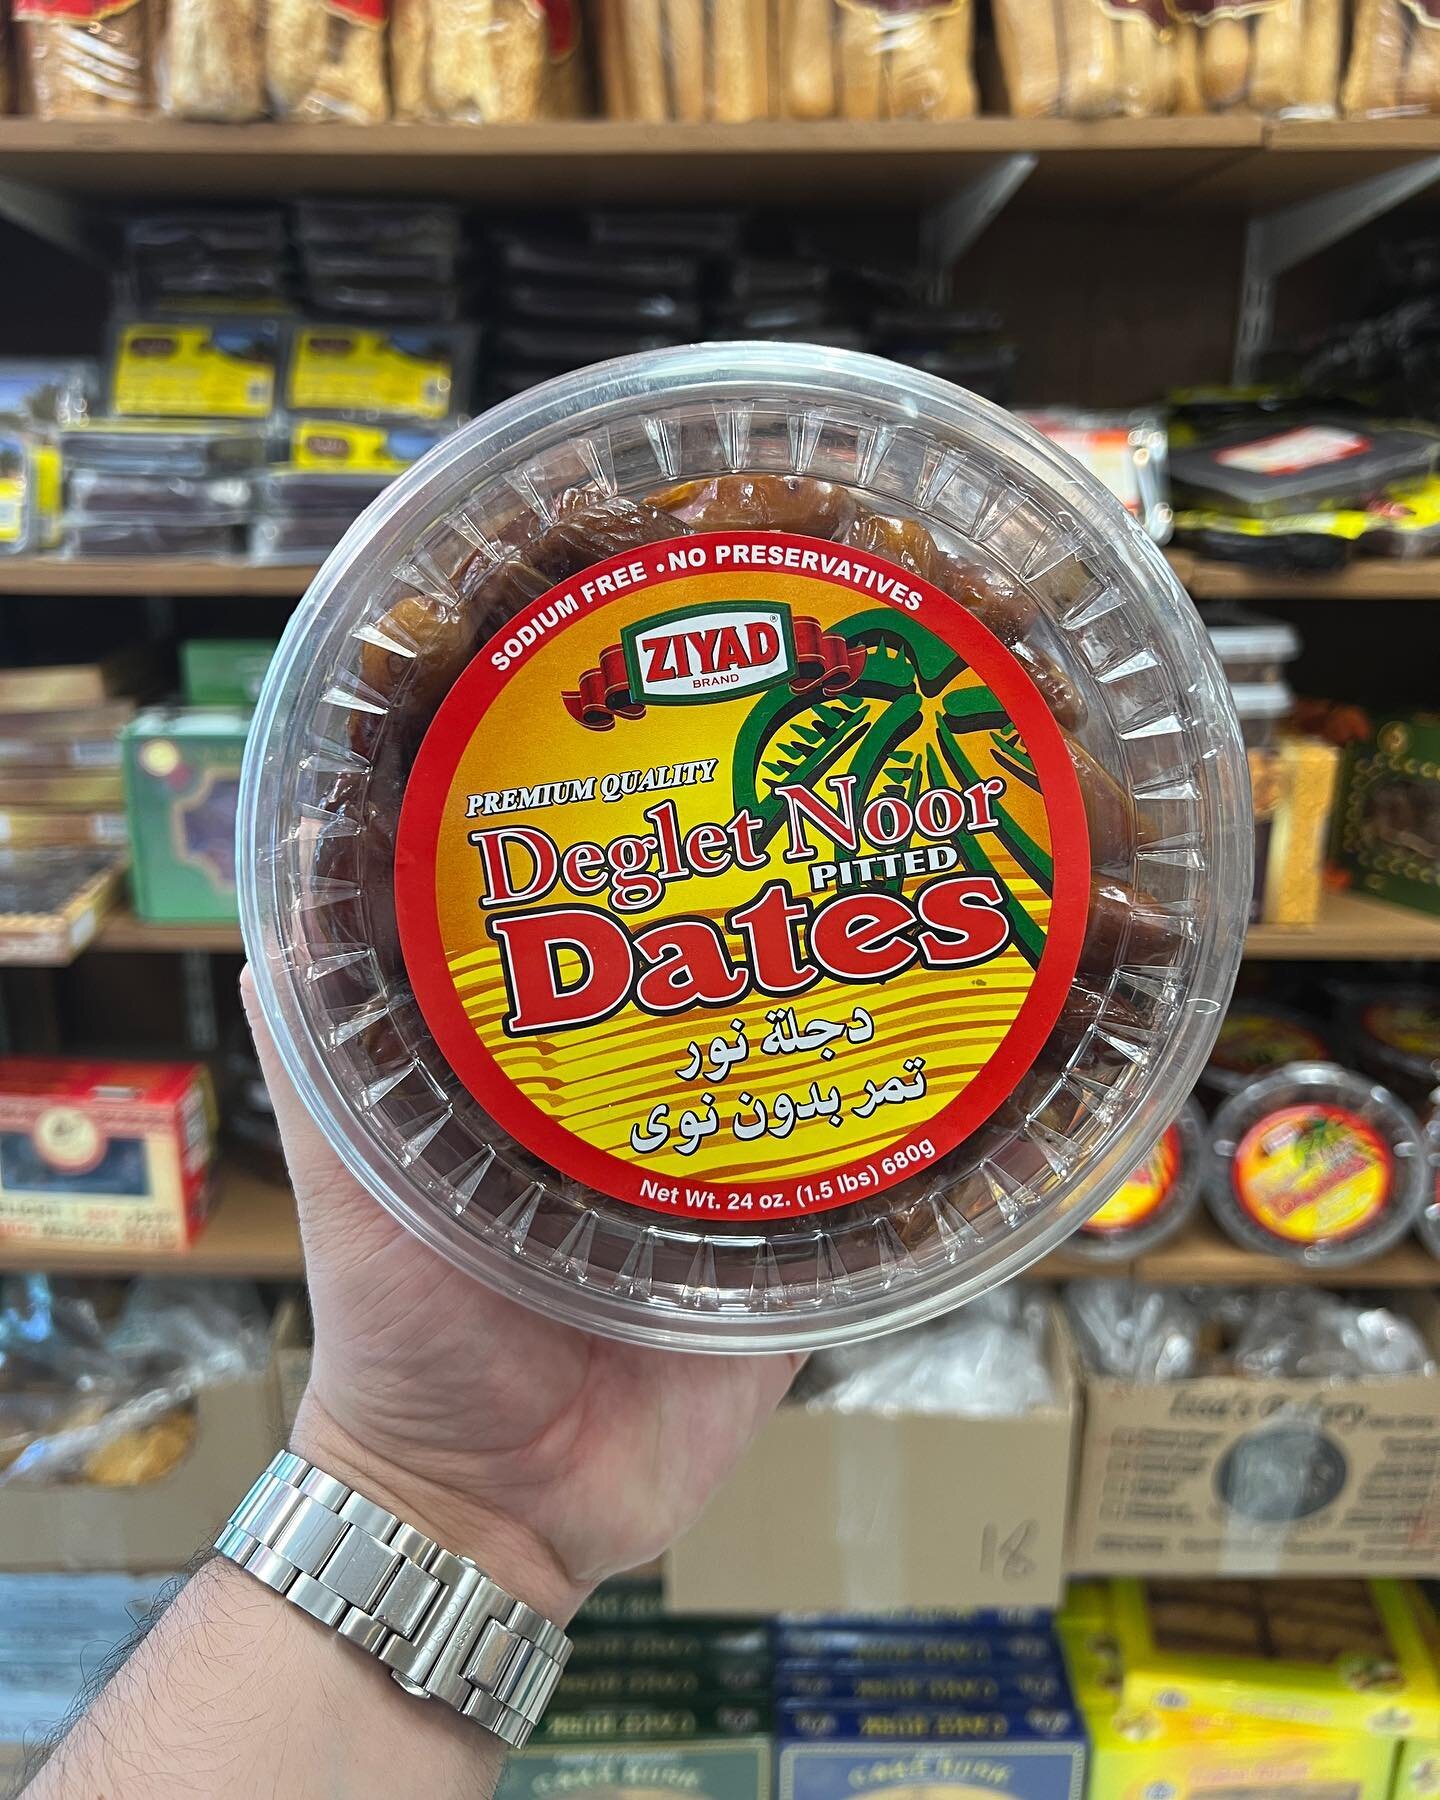 It doesn&rsquo;t have to be Ramadan to eat some dates! These Delget Noor dates are one of our year-round best sellers. Of course, we have so many options to pick from when it comes to dates.